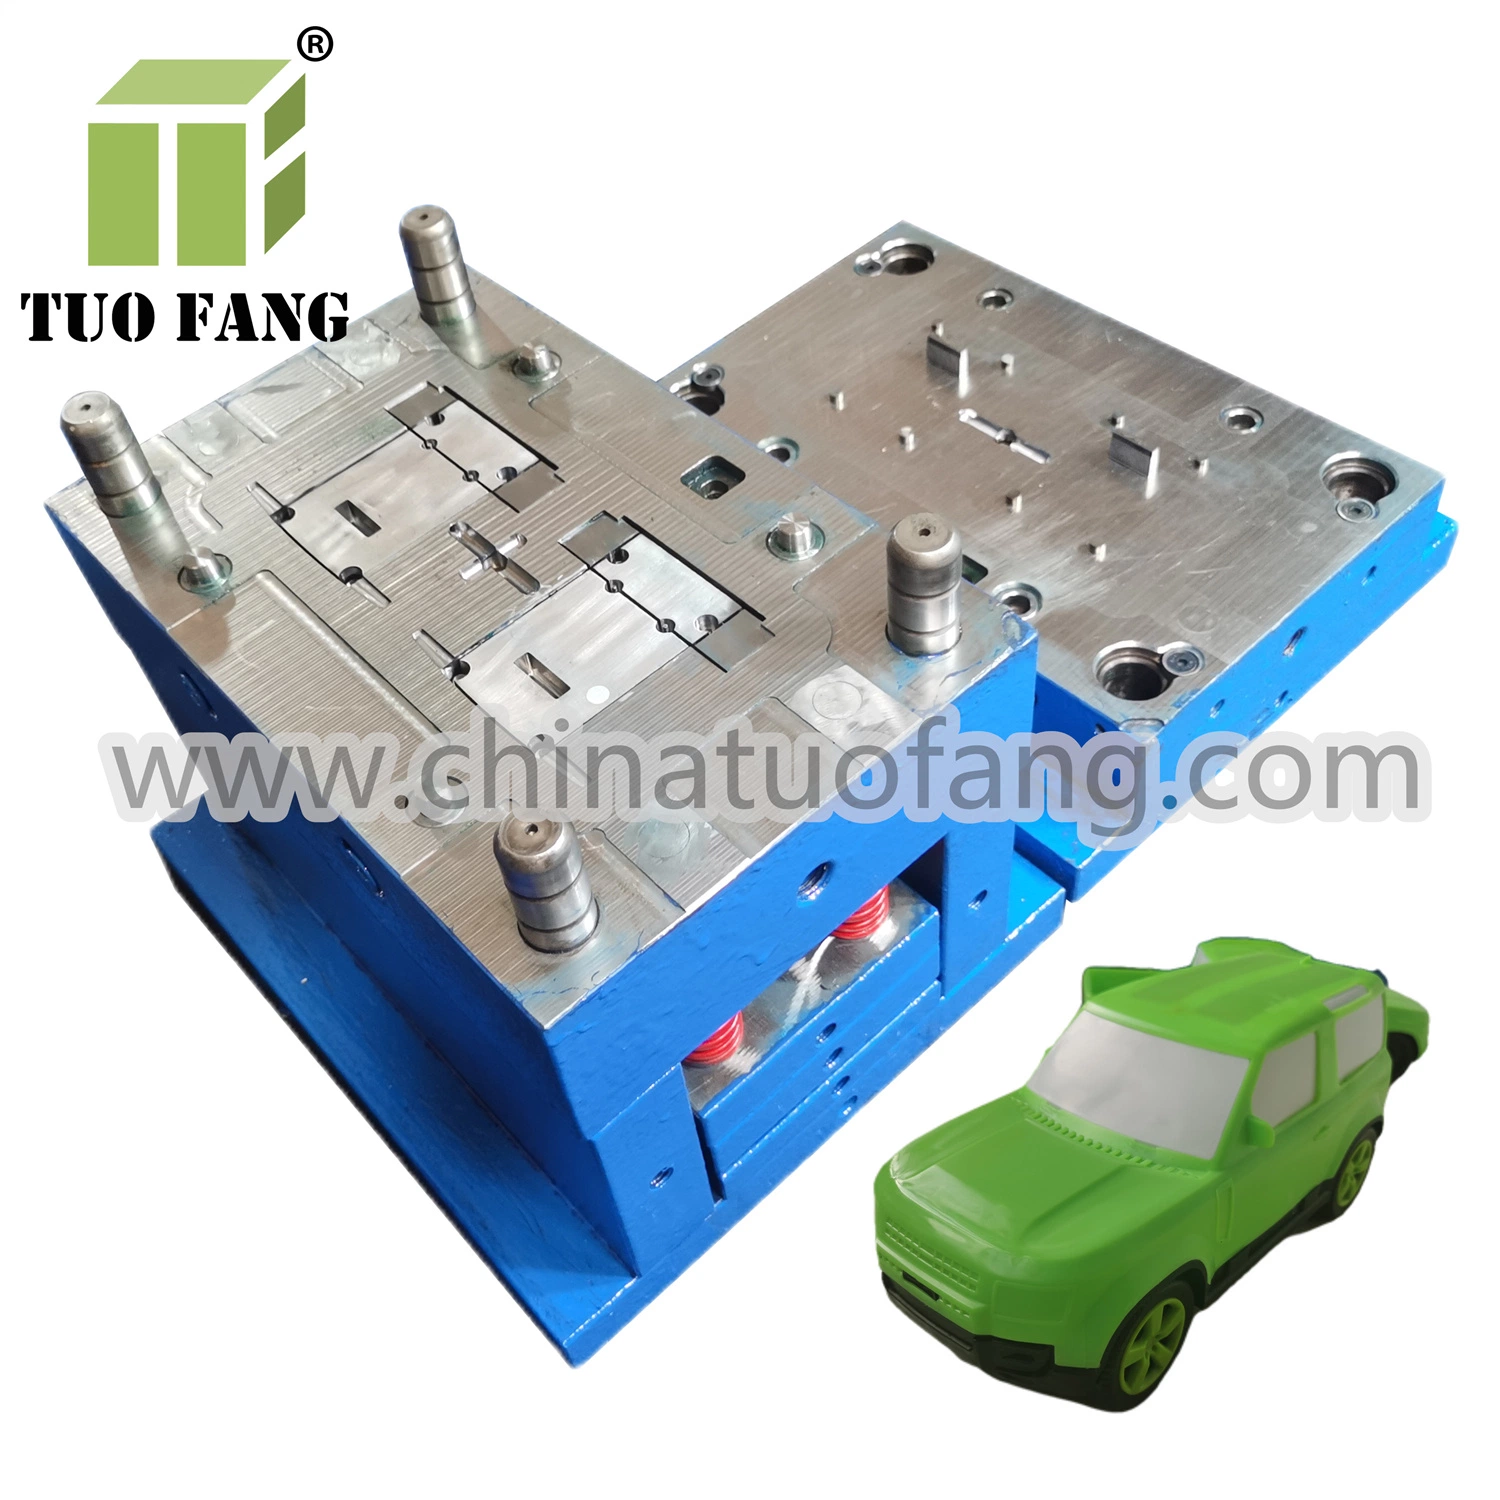 Mold for Vehicle Toys Mold for Custom Toy Cars Plastic Injection Mould